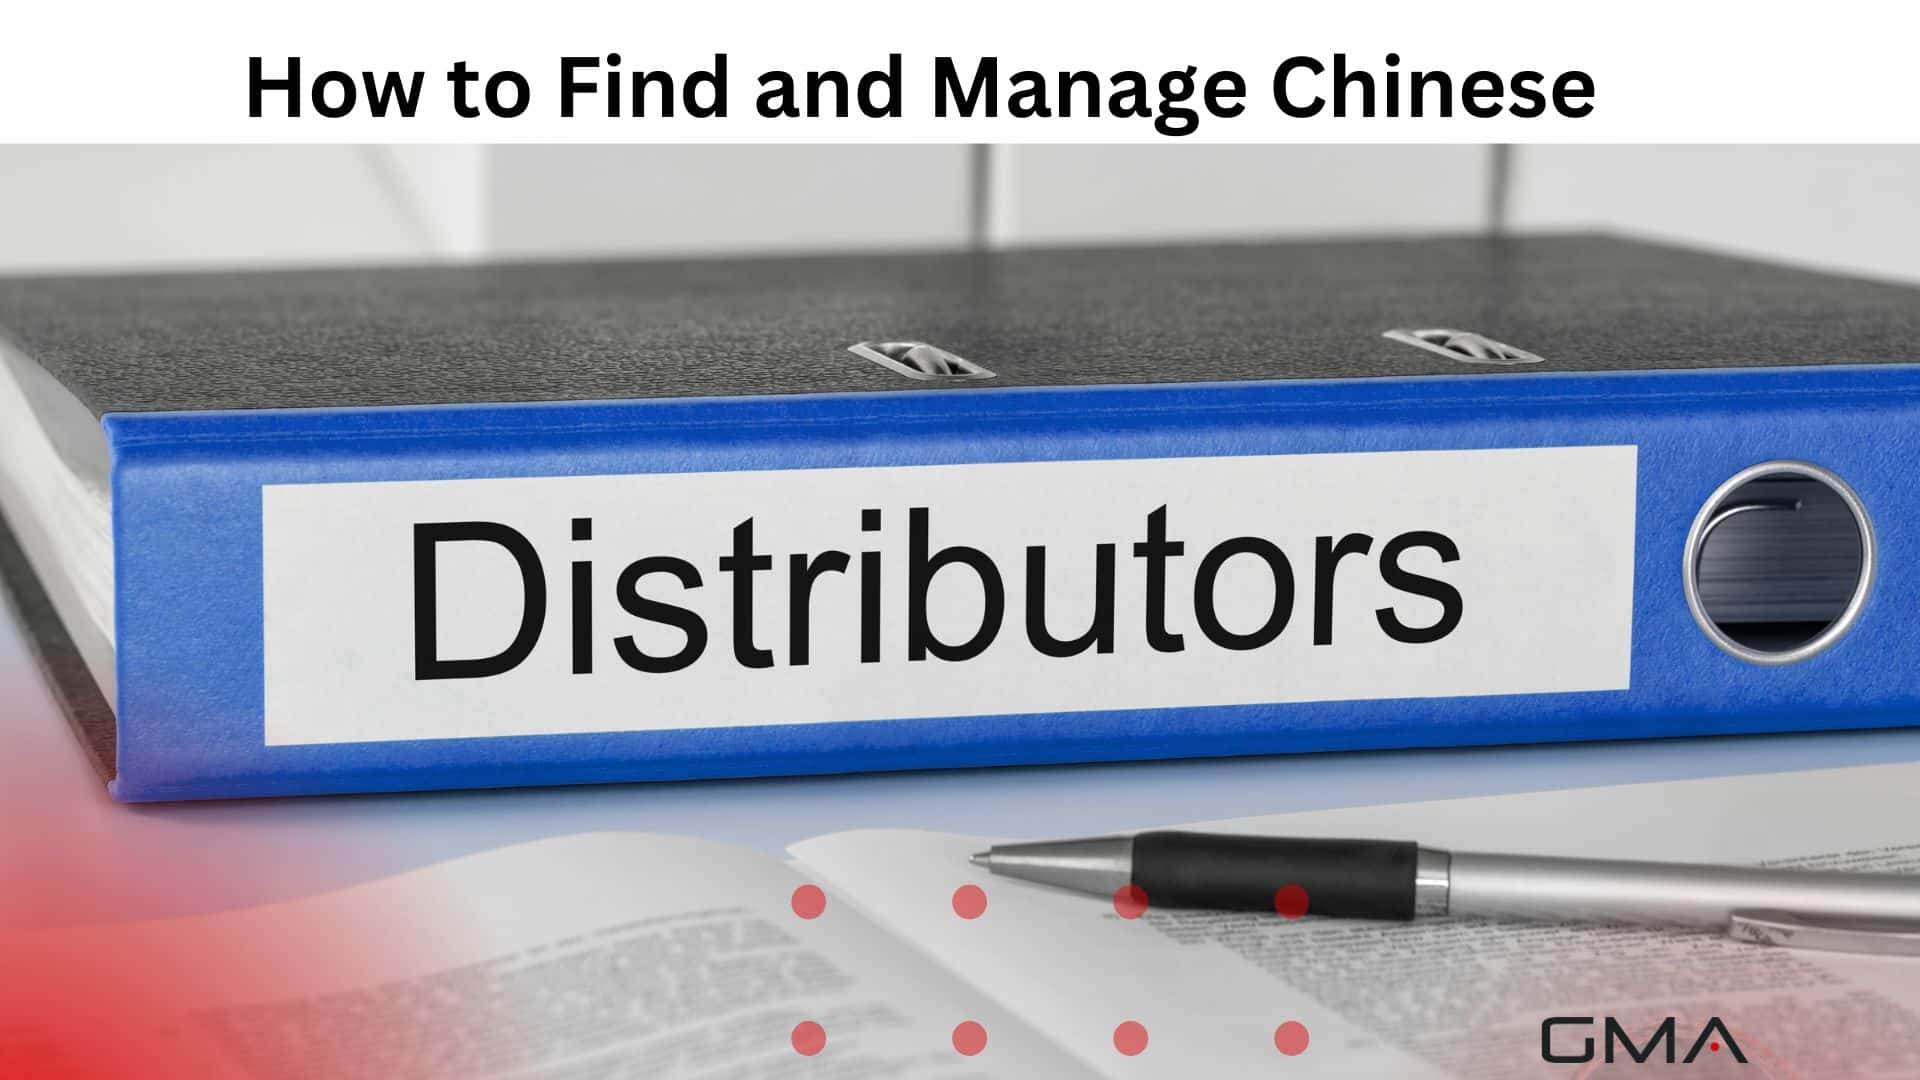 How to Find and Manage Chinese Distributors?